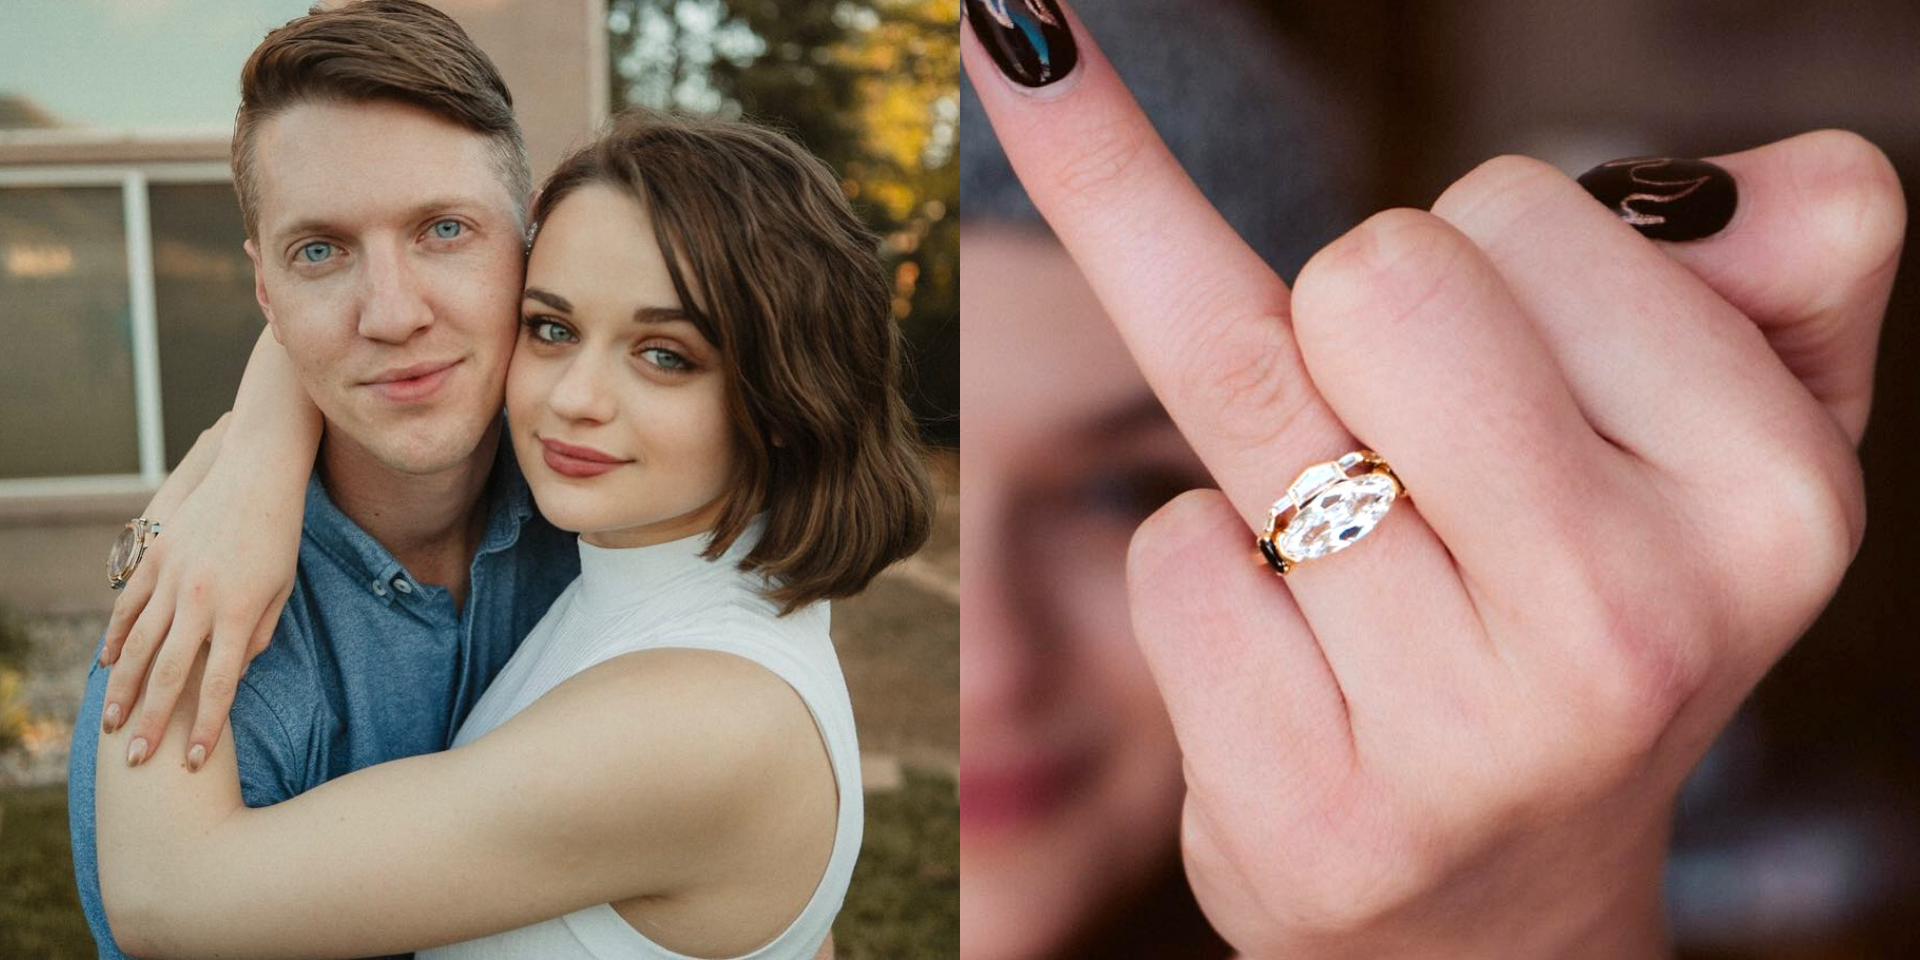 All the Details on Joey Engagement Ring from Steven Piet - How Much Does Joey King's Engagement Ring Cost?